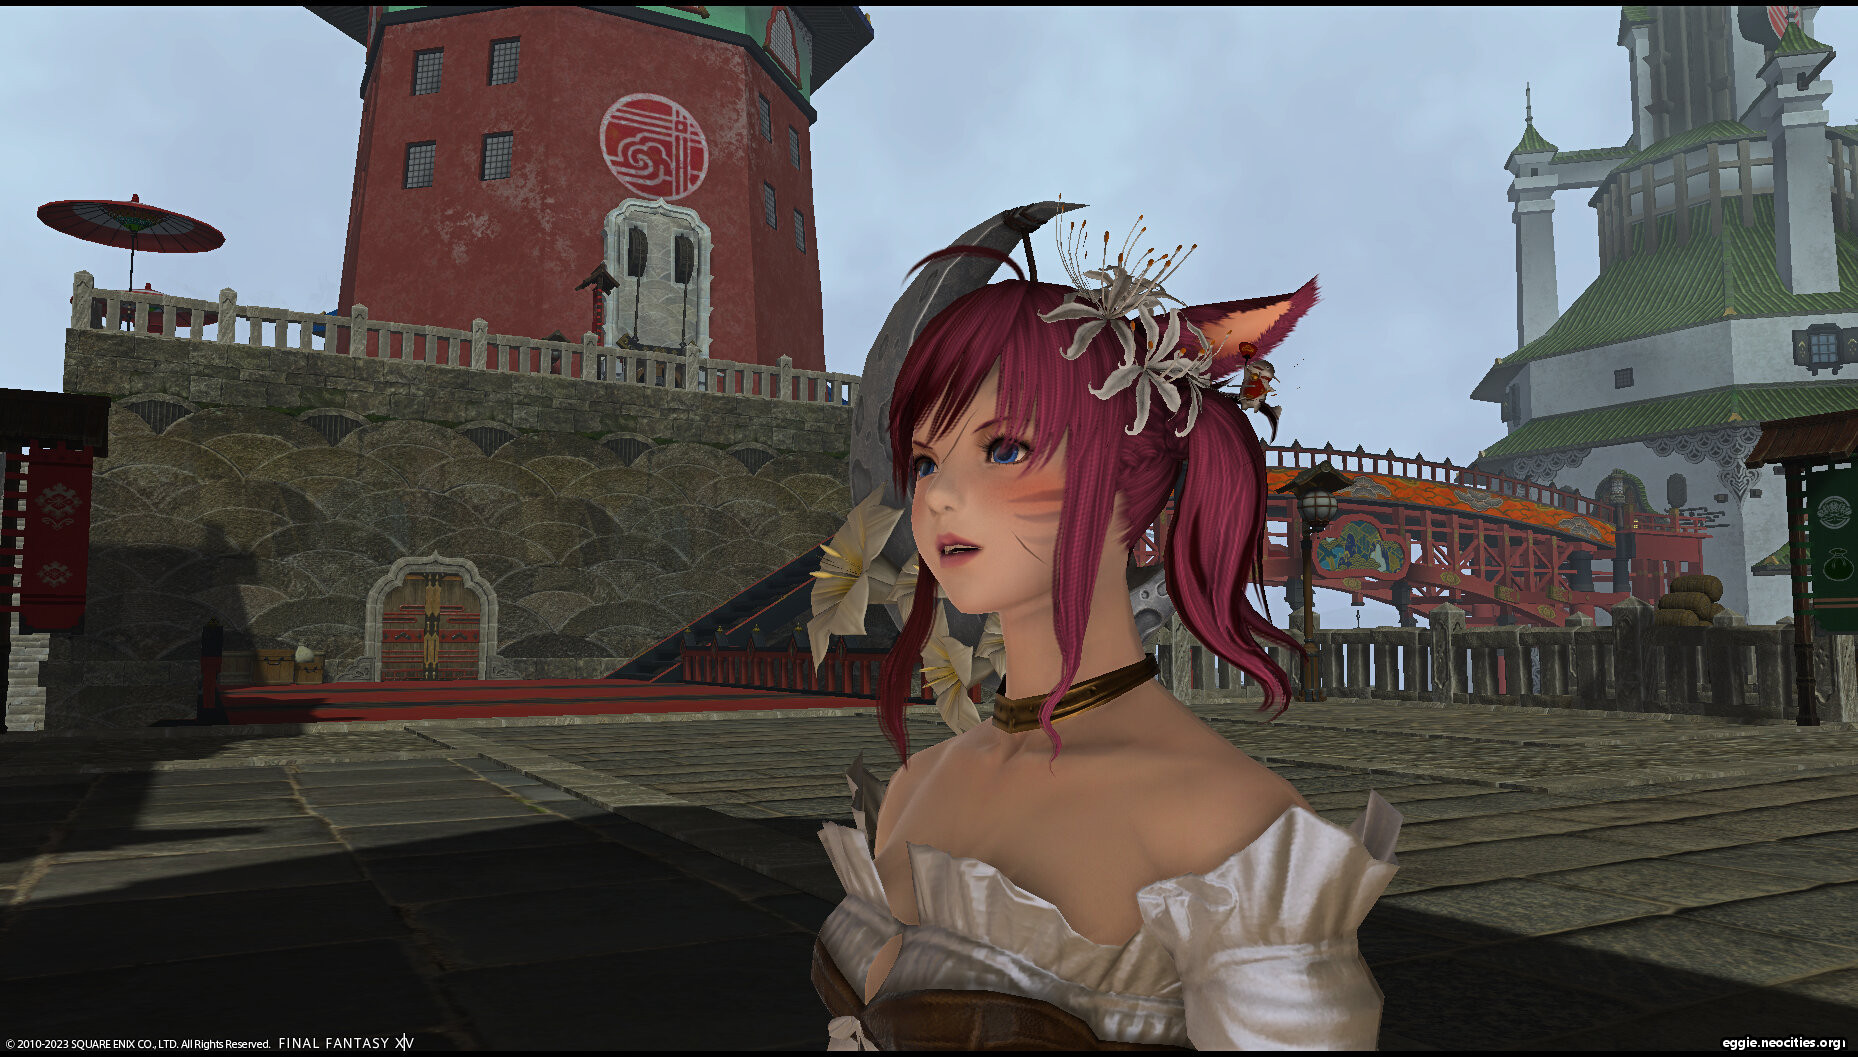 Zel with an incredulous look on her face.